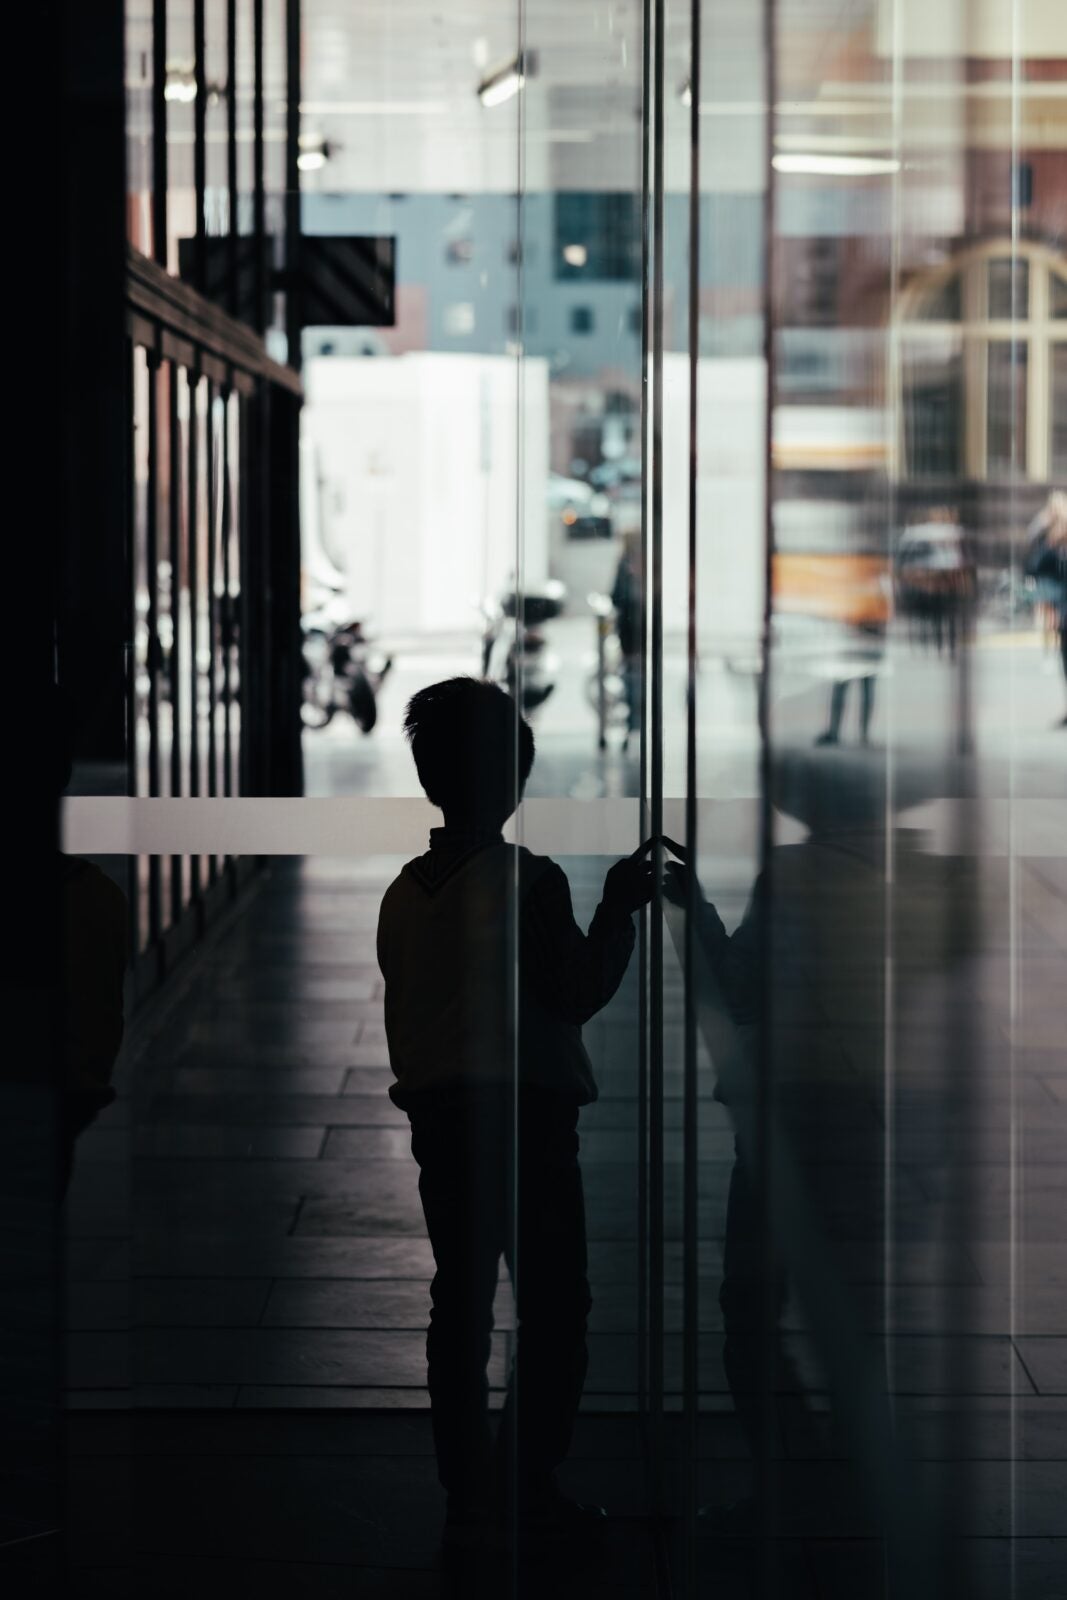 Silhoutte of a young boy in front of a glass door in a dark hallway.